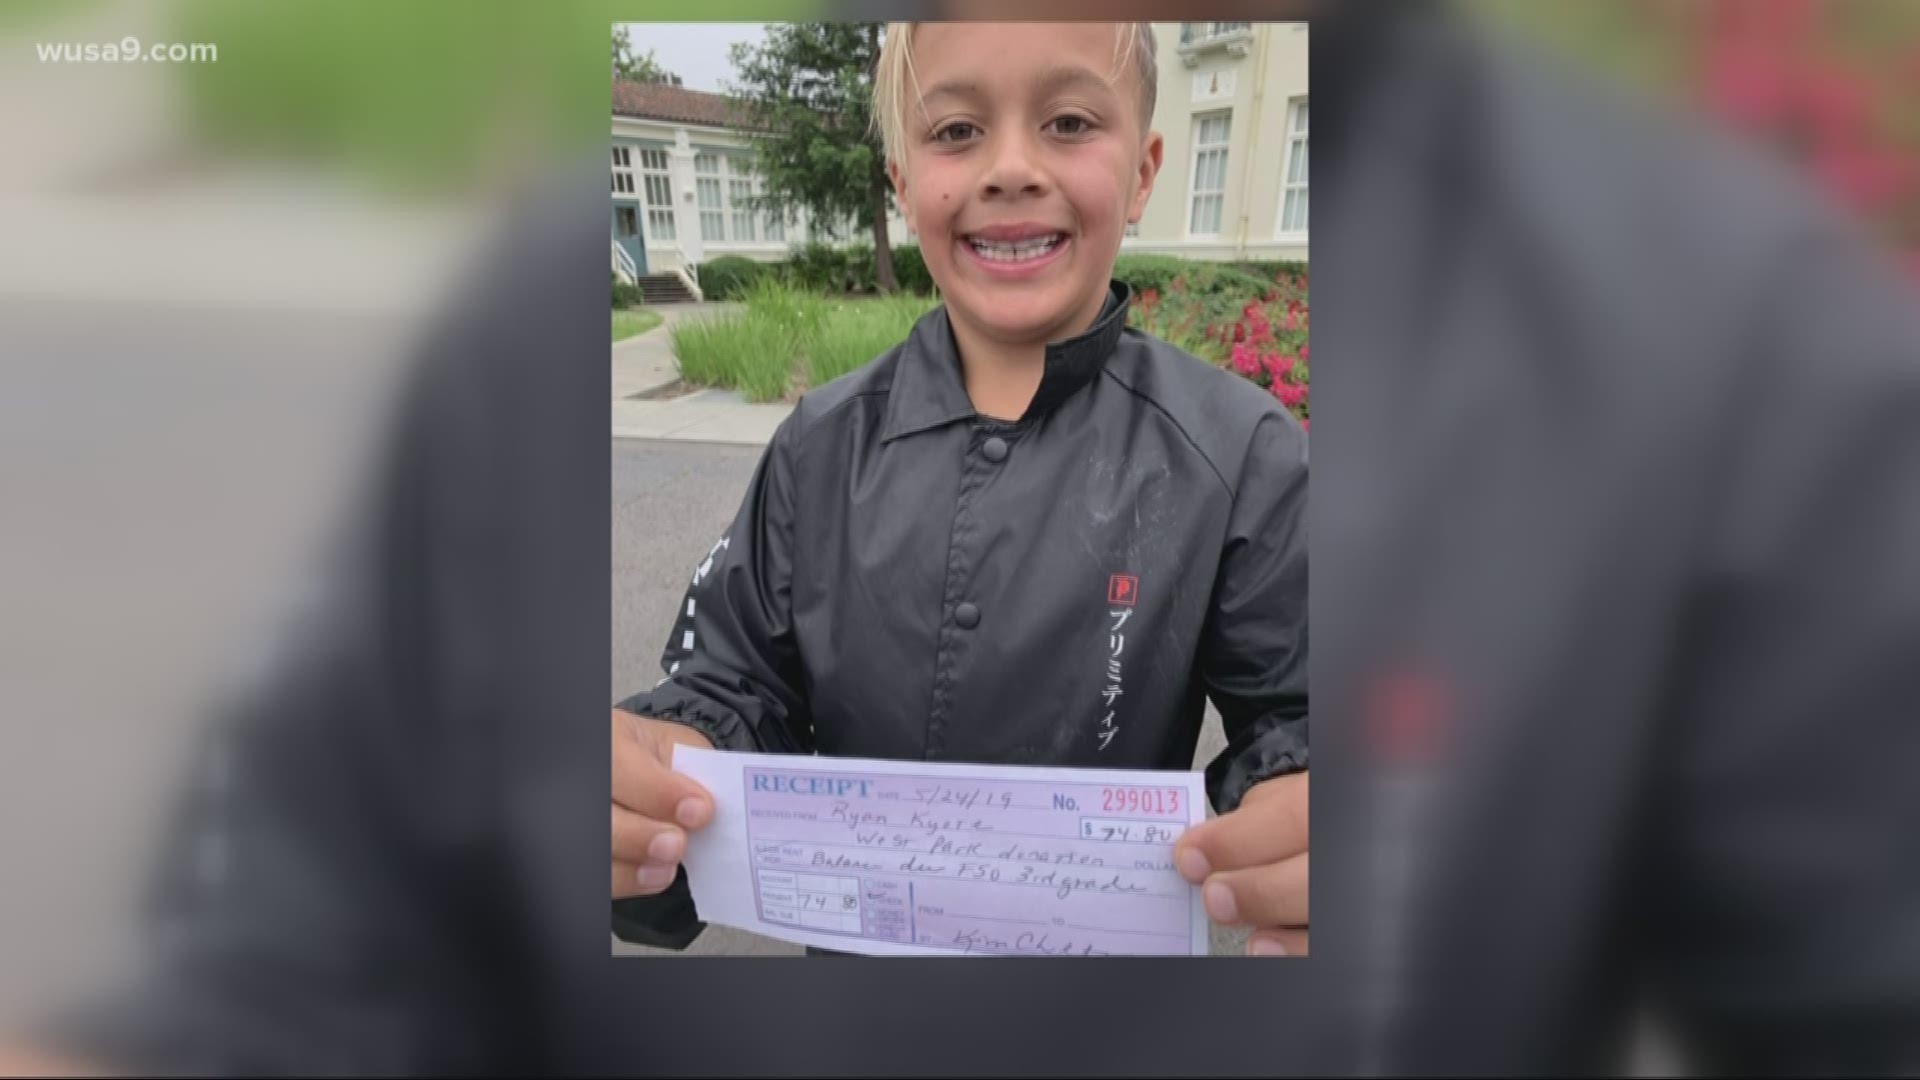 Ryan, a third-grader, helped fellow classmates at a California school pay off their lunch debts using his allowance money. Reese says we can all learn something from this young man.